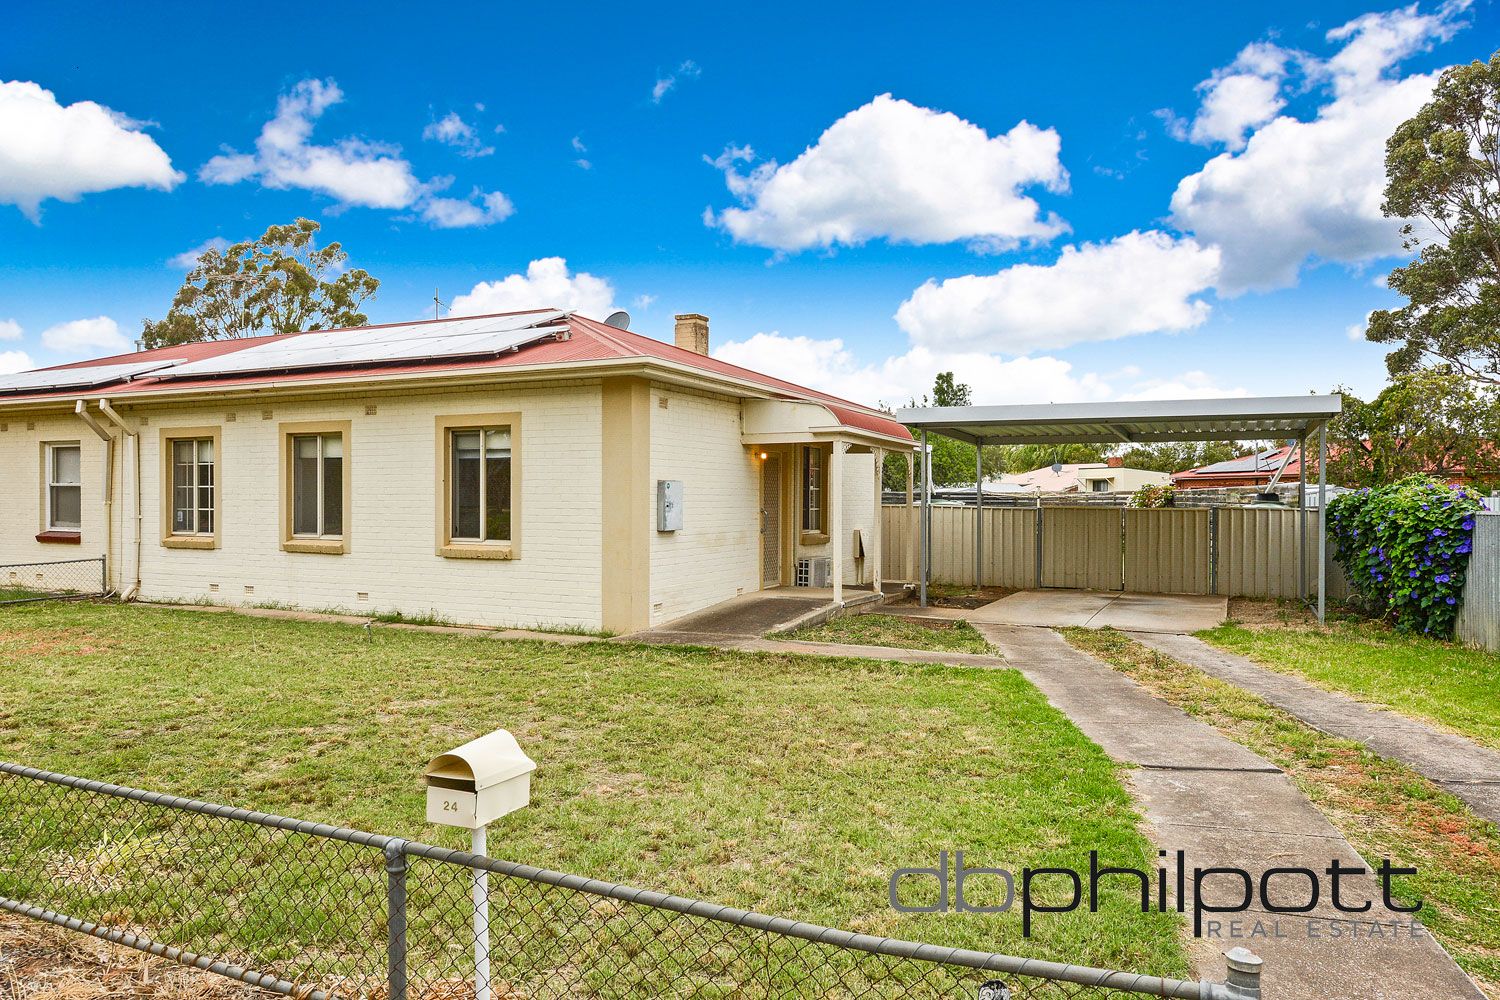 3 bedrooms House in 24 Lawrence Avenue GAWLER SOUTH SA, 5118